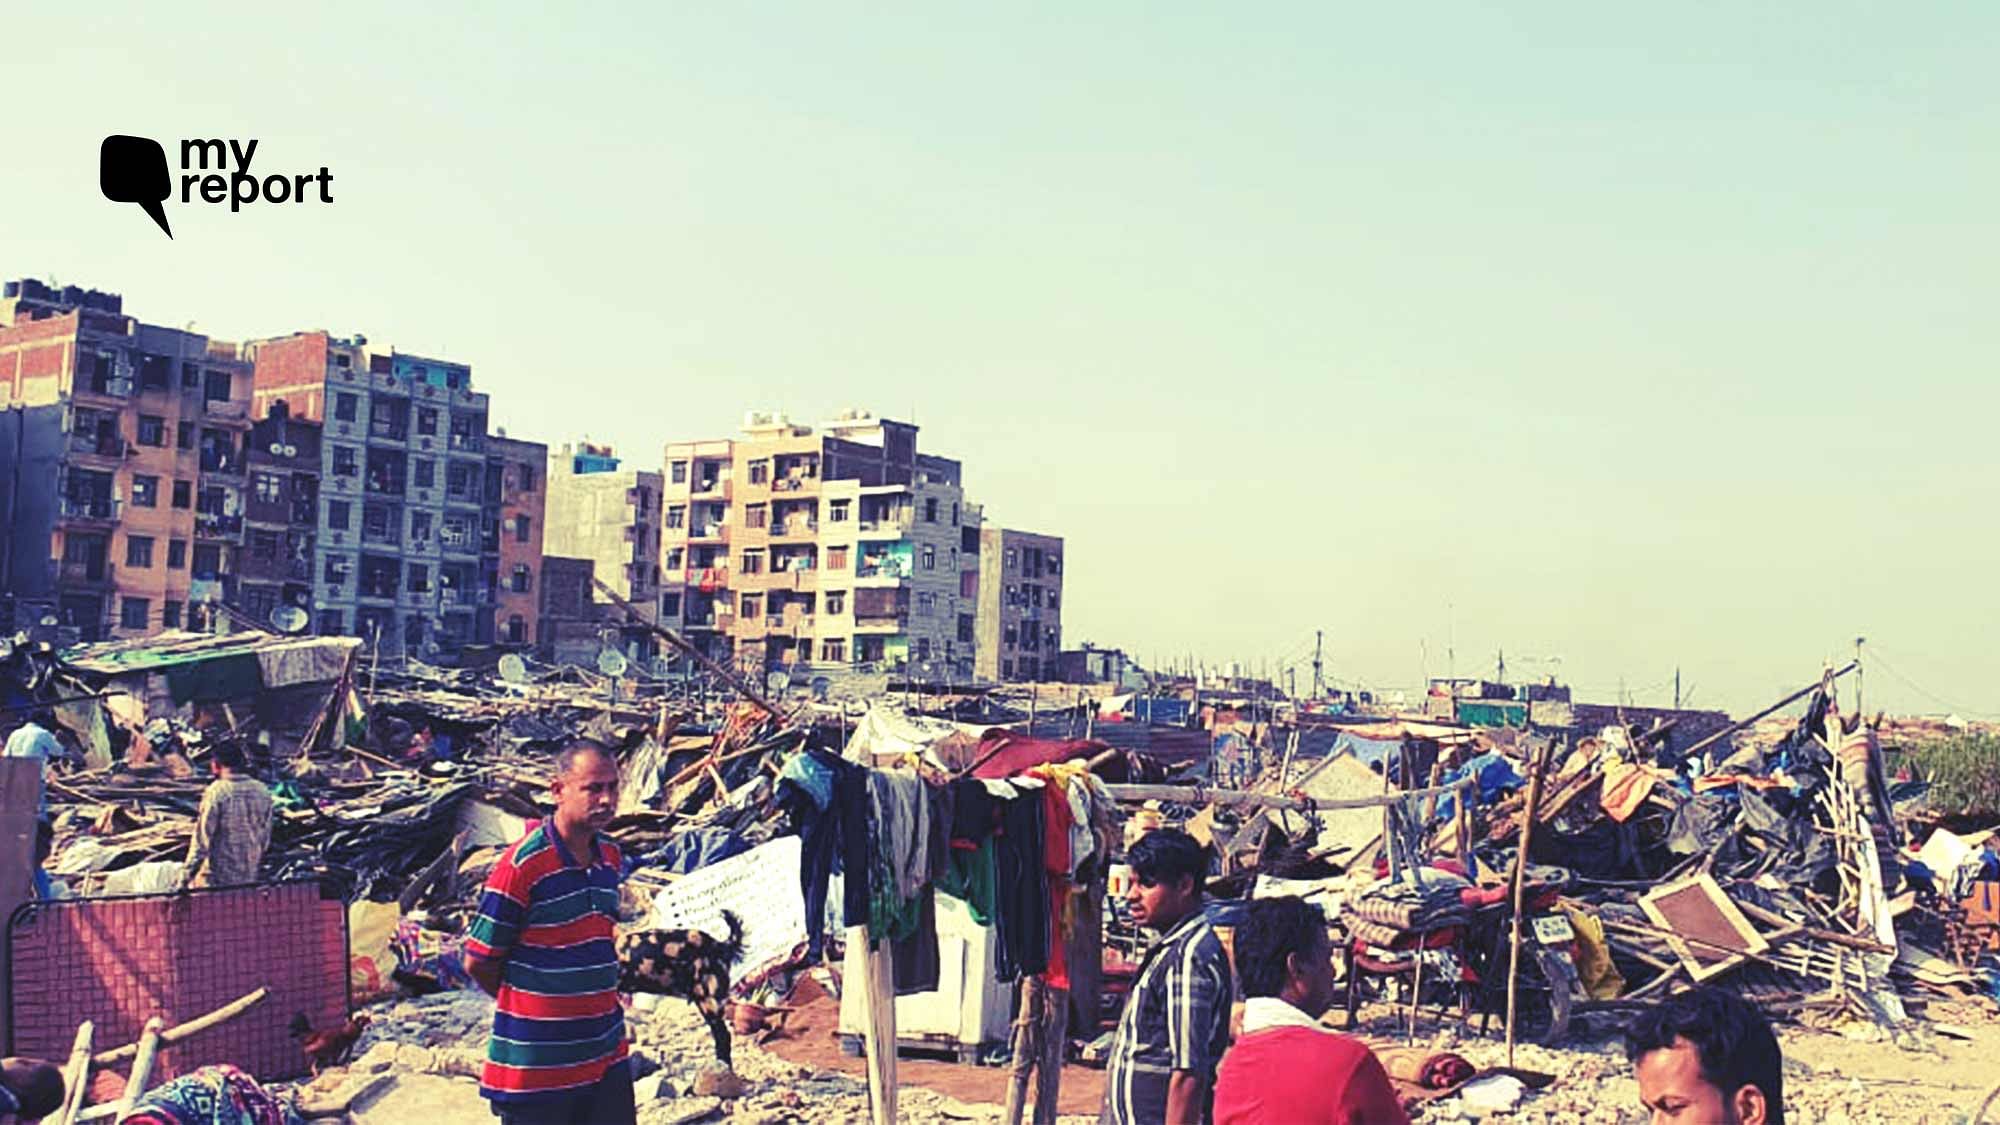 Residents of Delhi’s Batla House  have been rendered homeless after a slum clearance drive on 24 September.